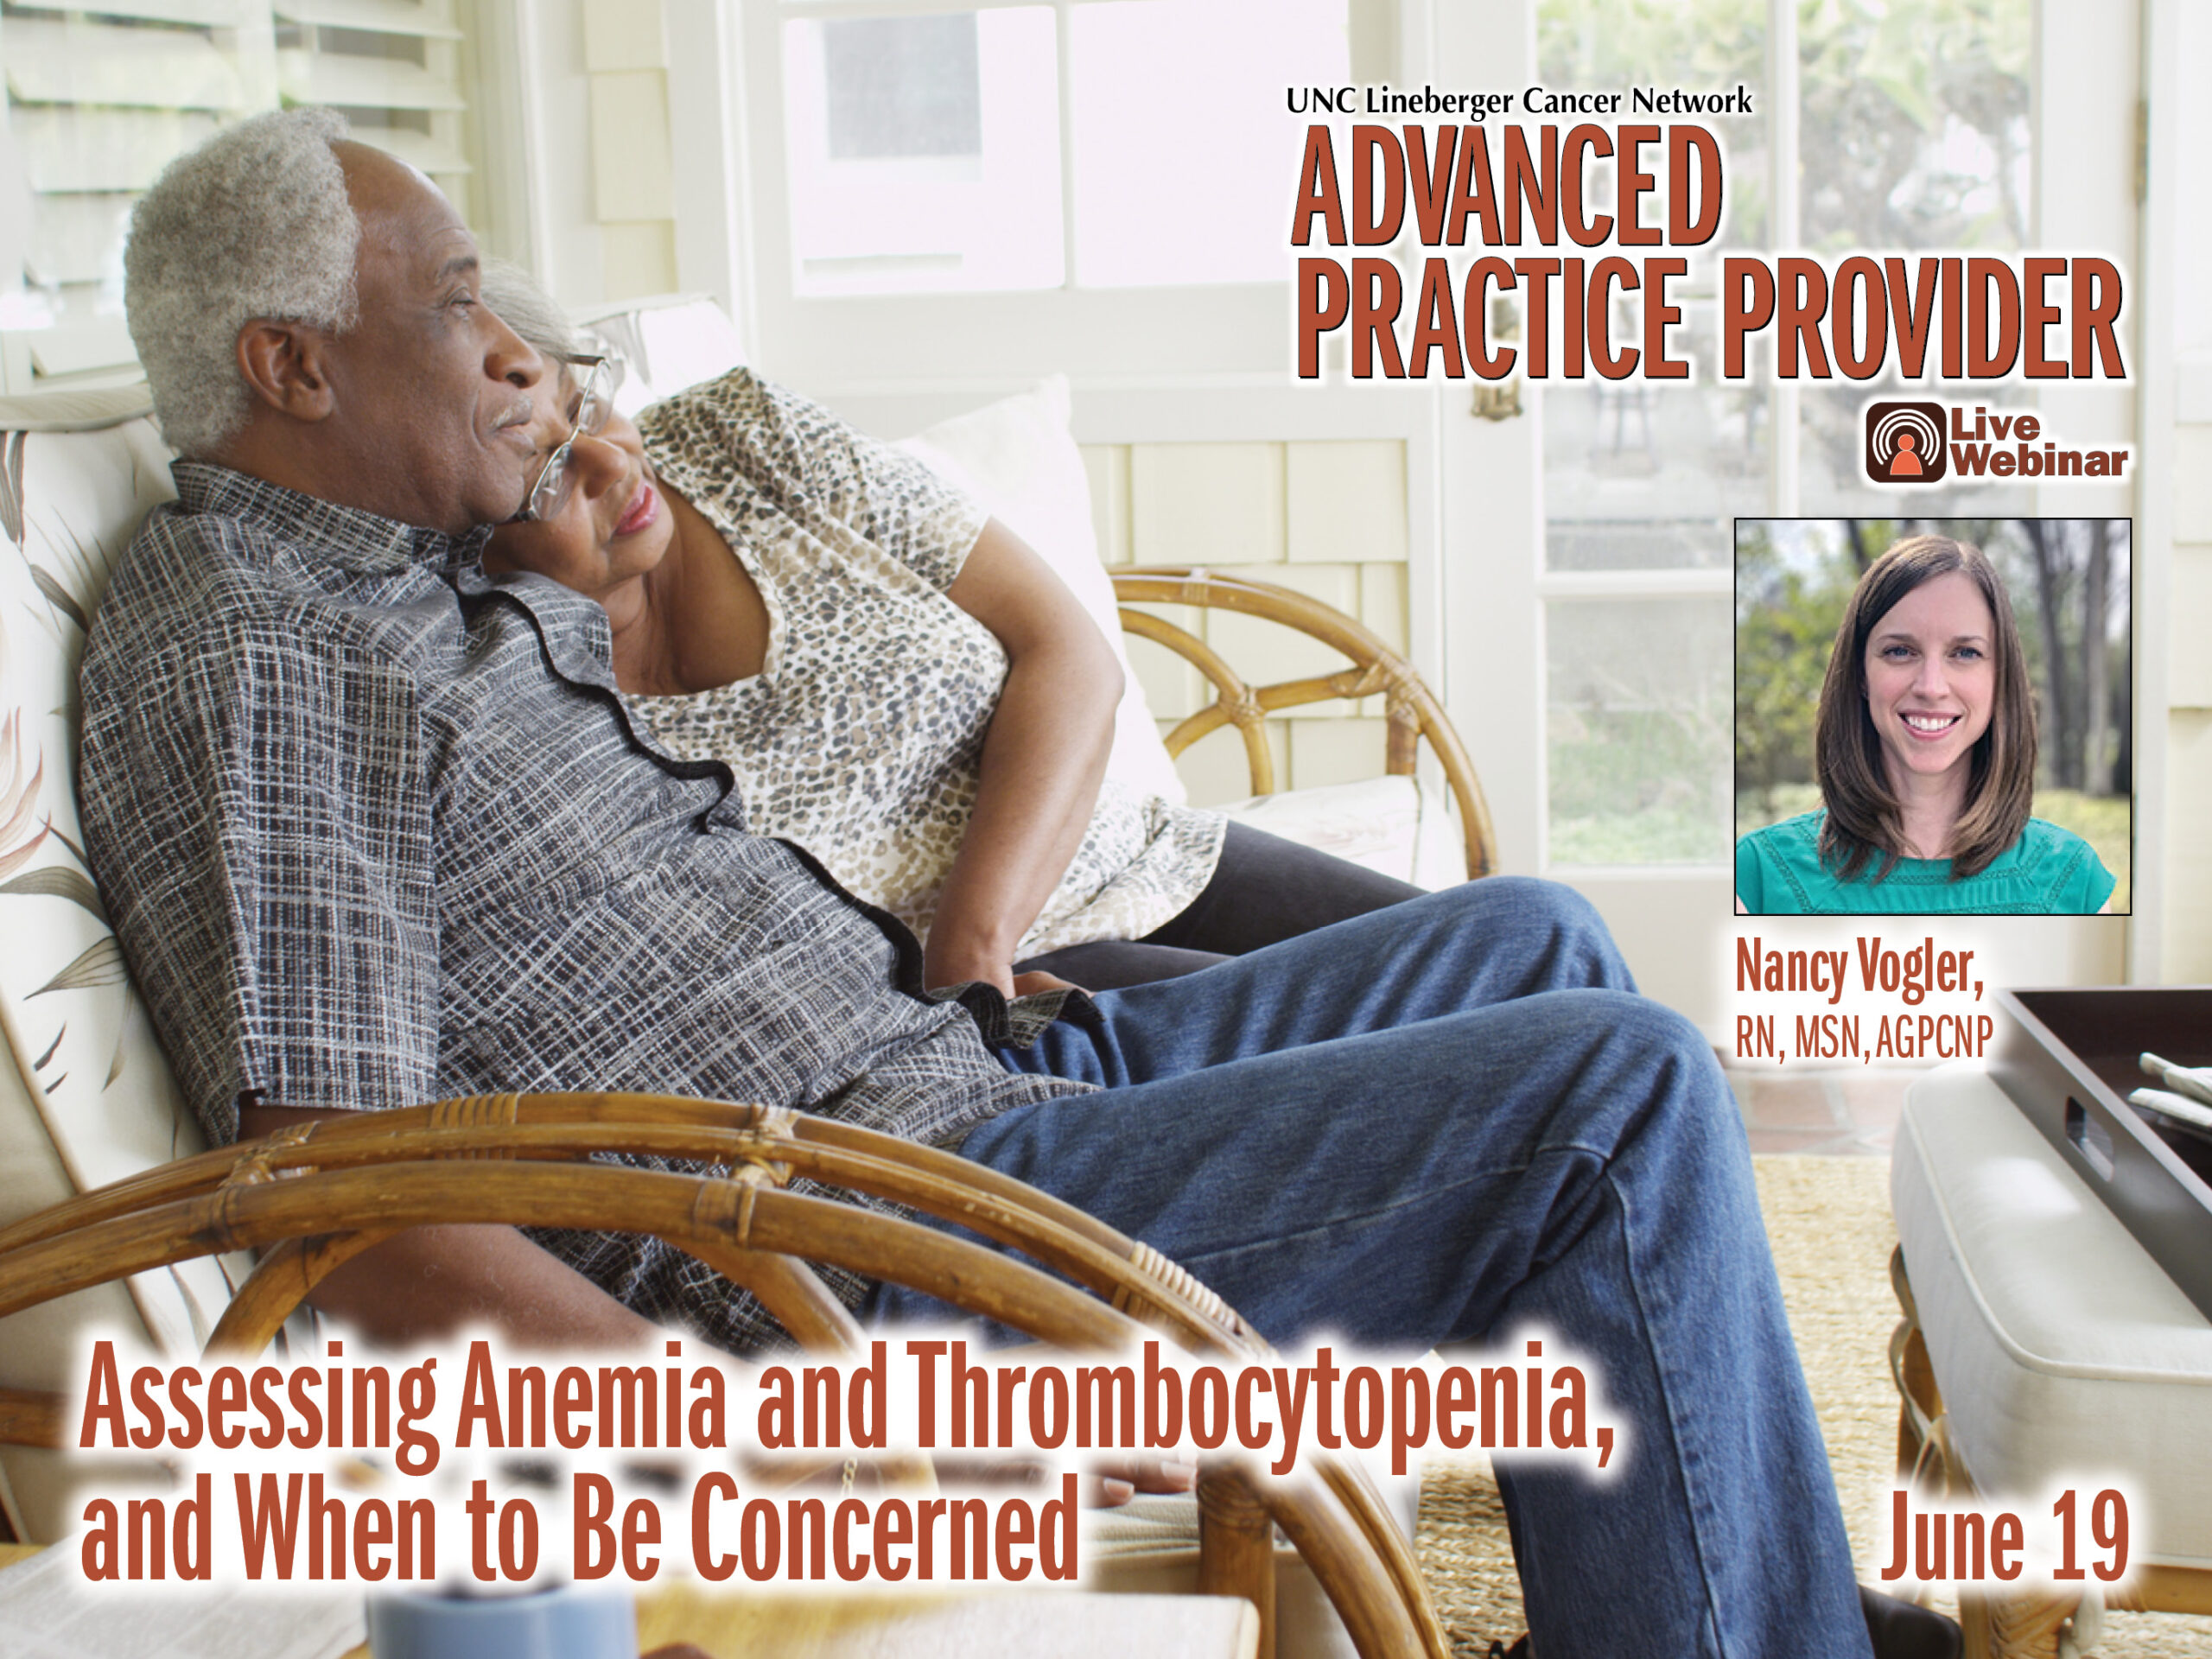 Assessing Anemia and Thrombocytopenia, and When to Be Concerned